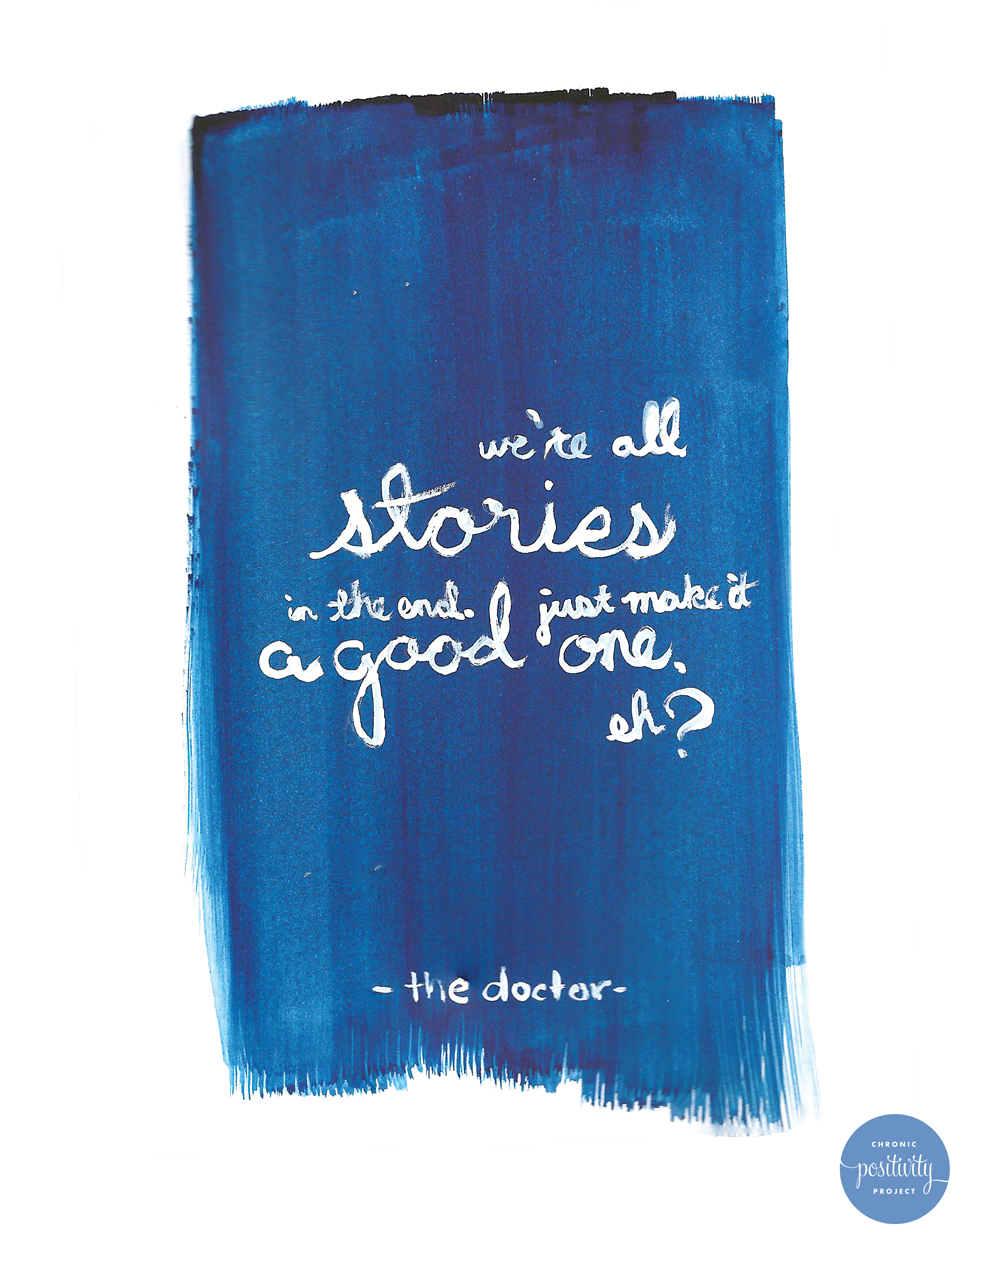 "We're all stories in the end, so make it a good one, eh?" A quote from the Doctor | Doctor Who